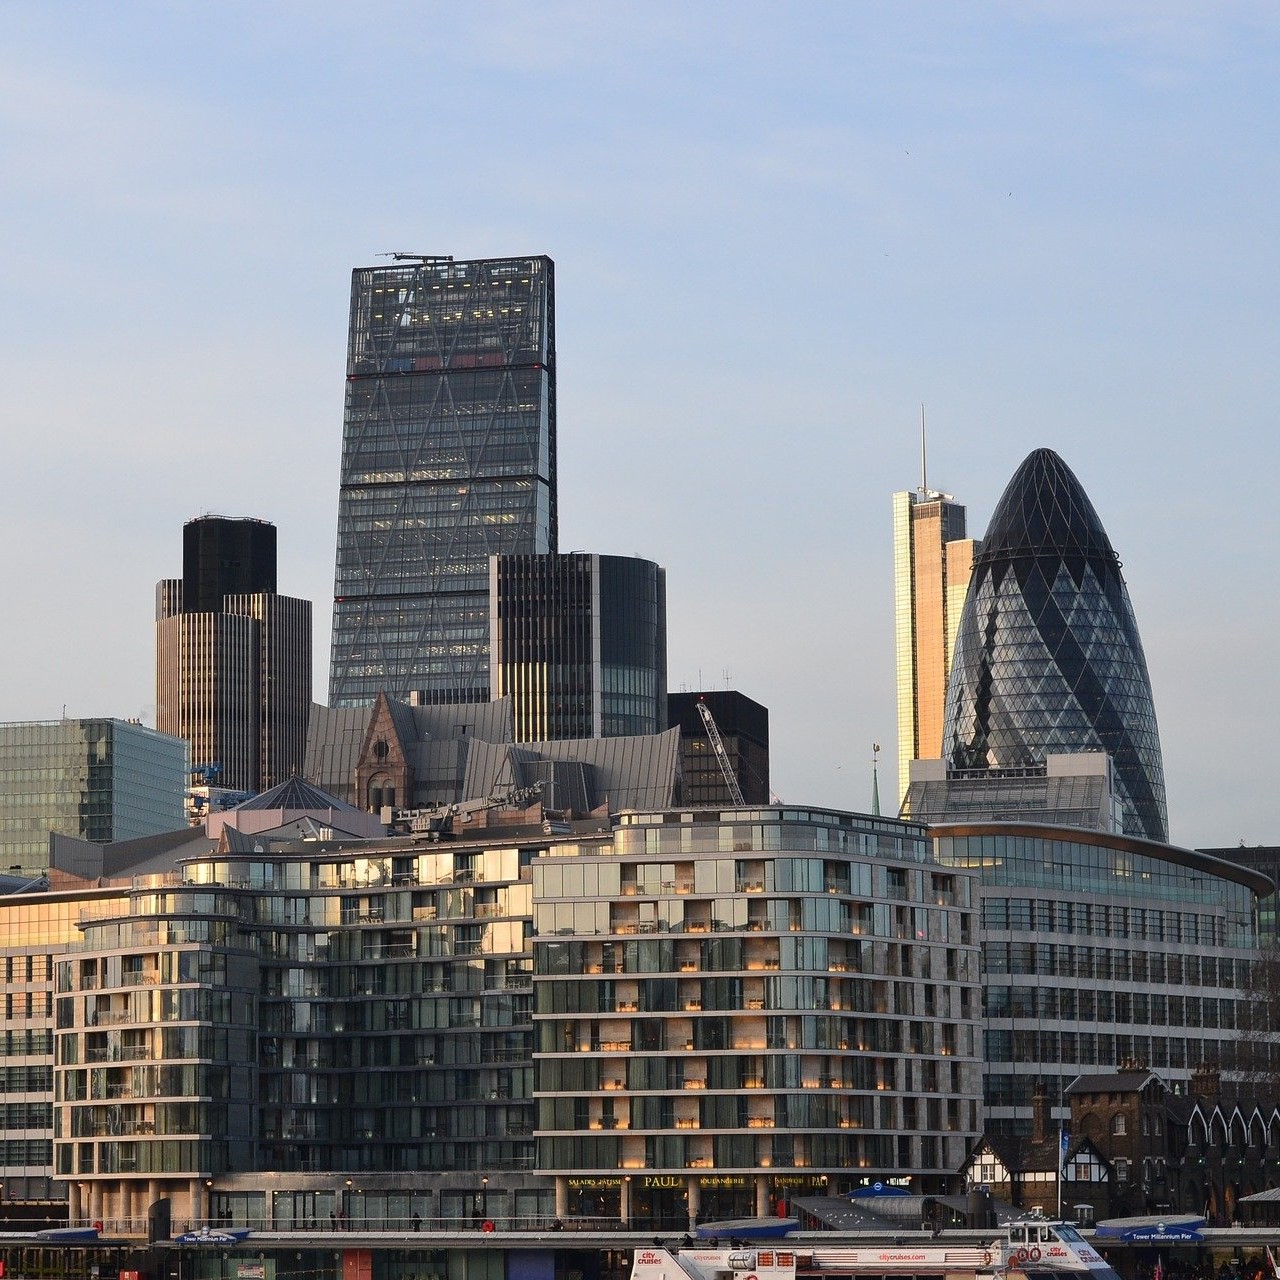 London office leasing activity gathers momentum in Q2 2021